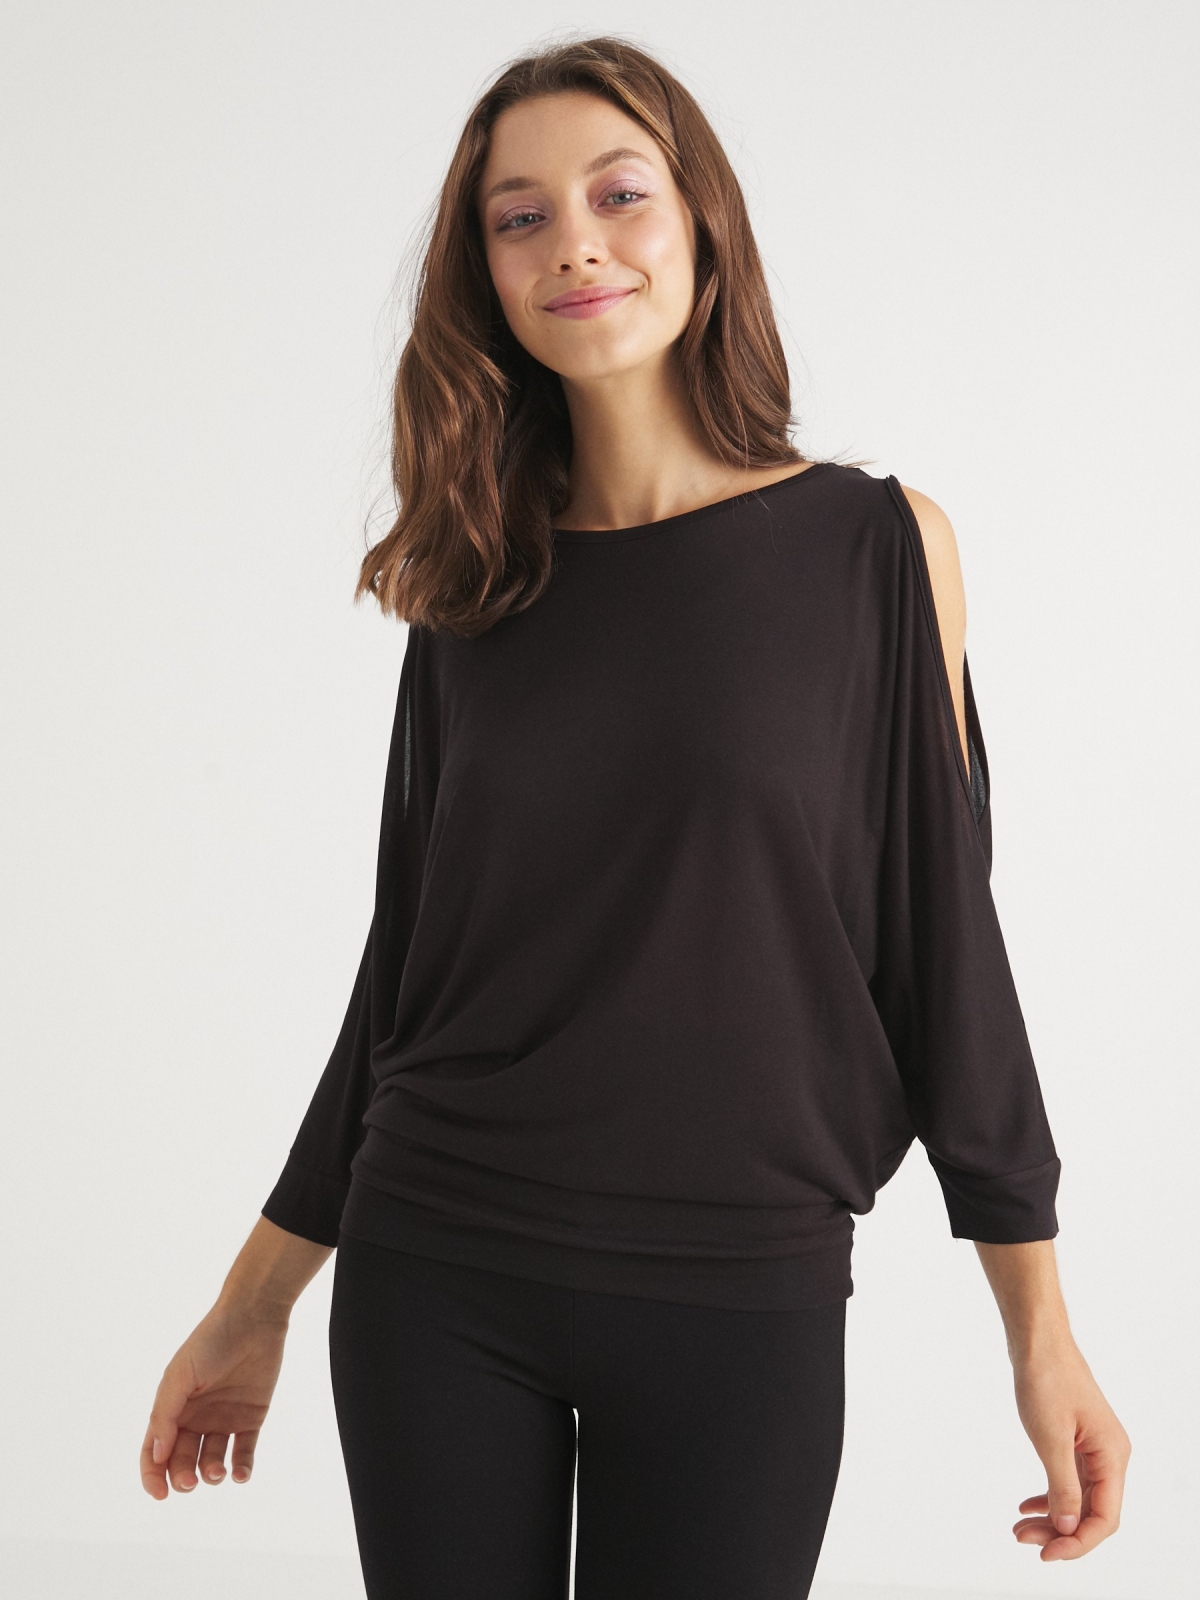 Fluid T-shirt with open sleeves black middle front view